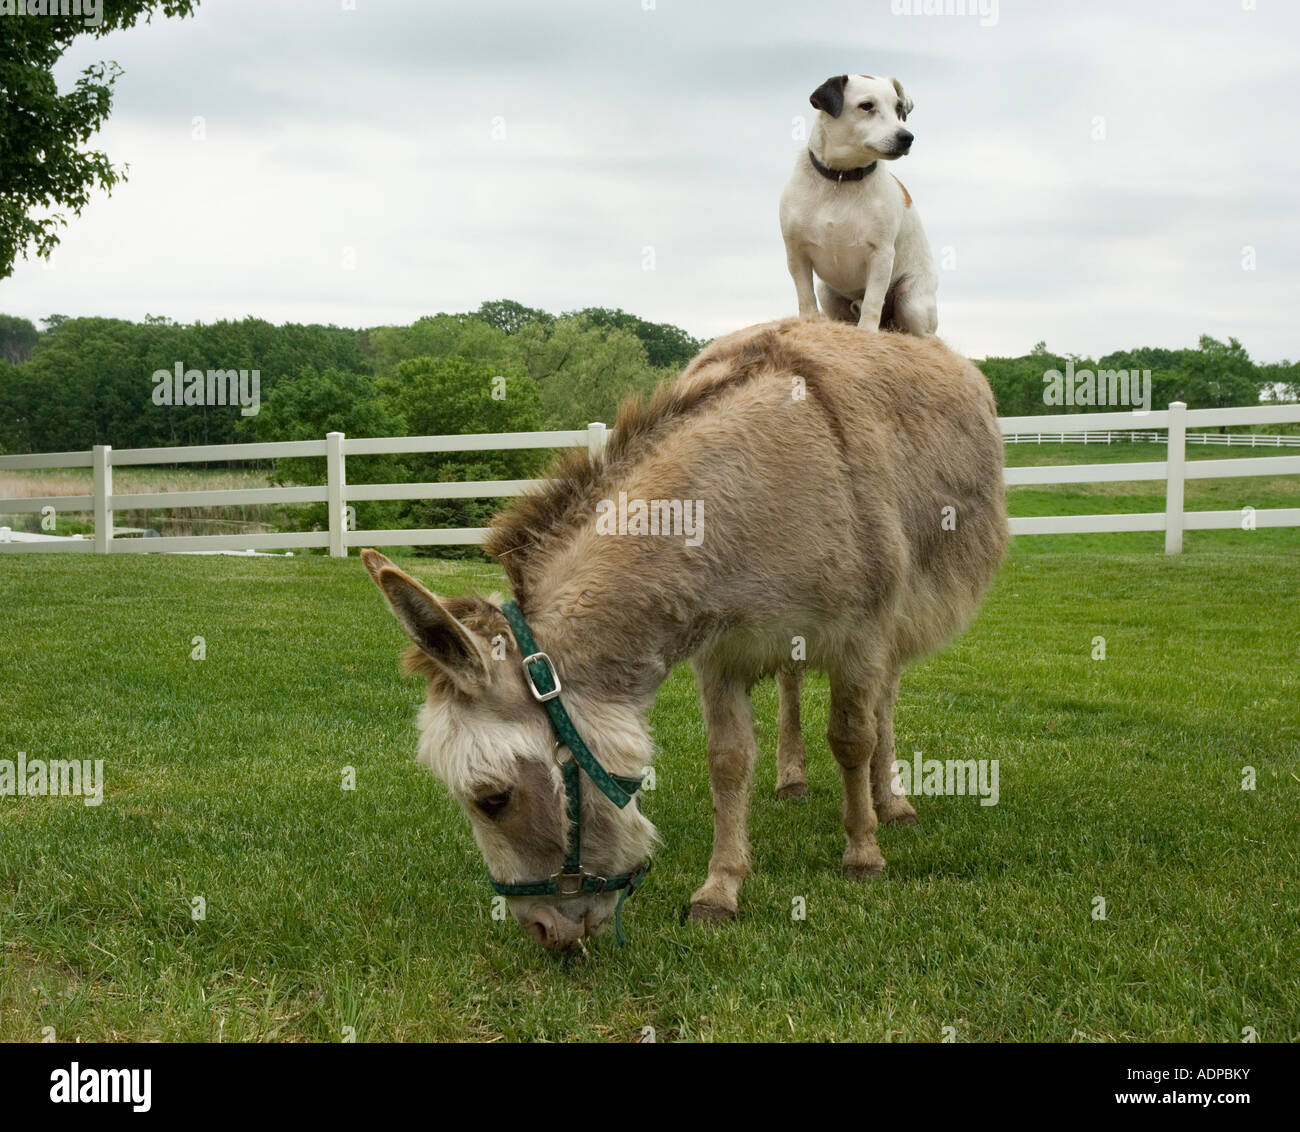 Jack Russel Terrior dog riding on the back of a donkey Stock Photo